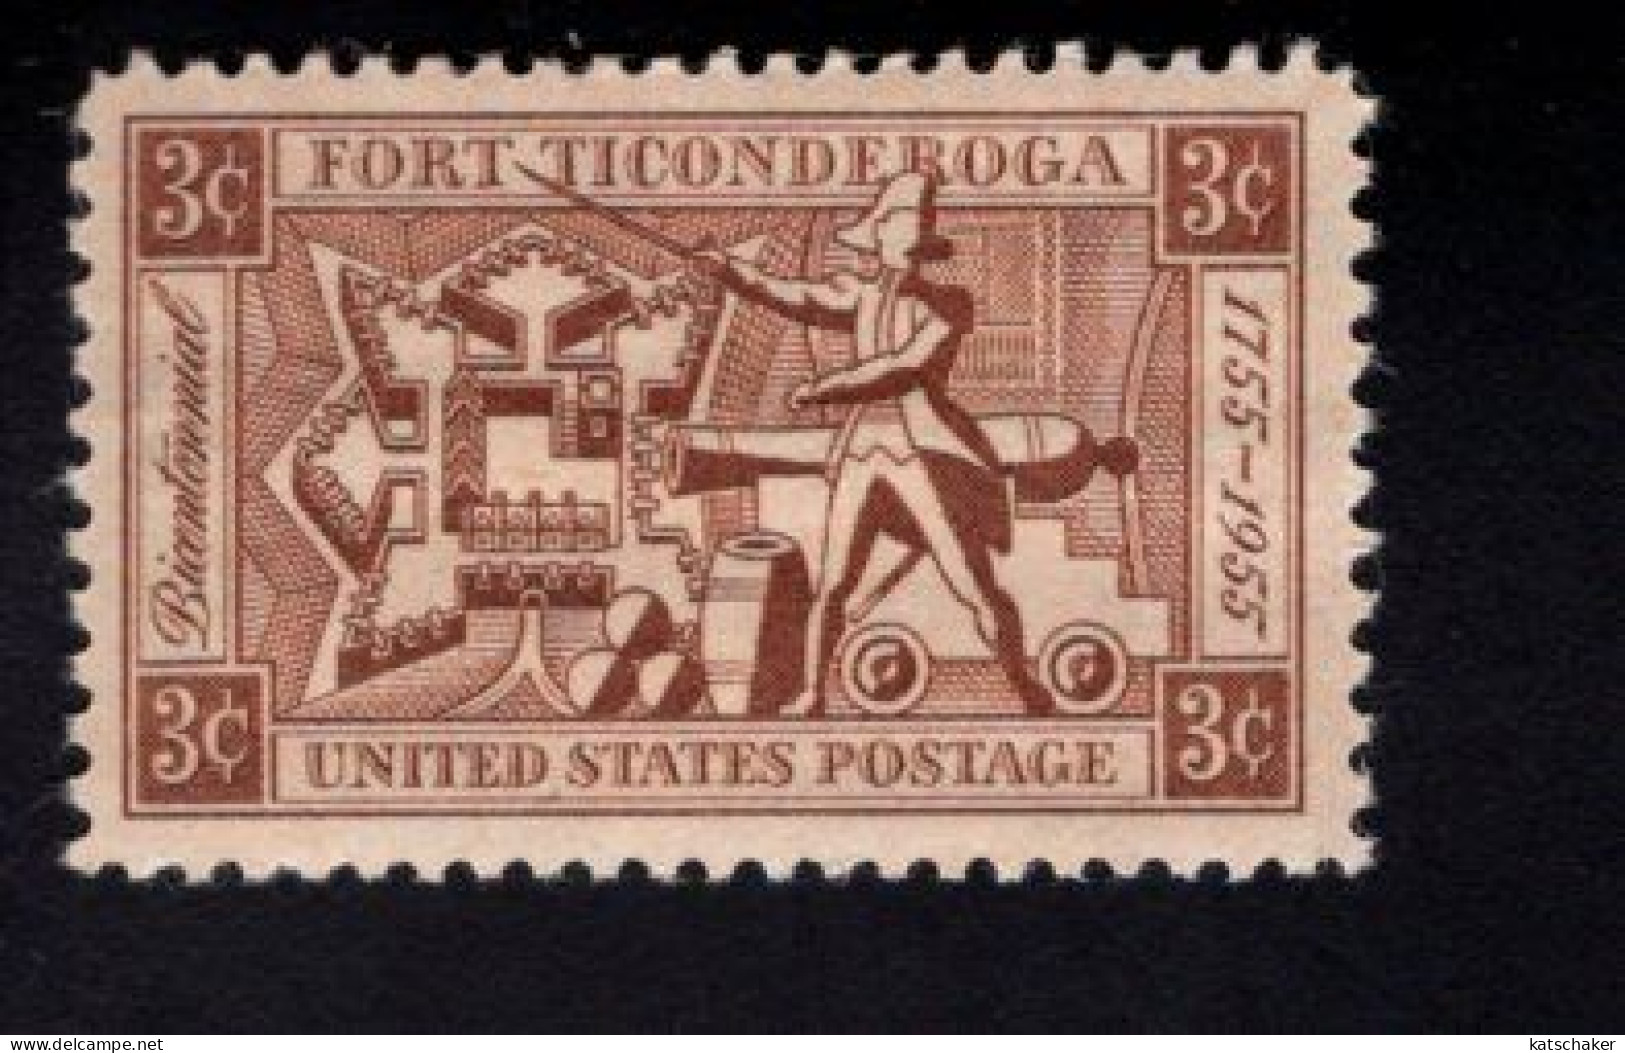 2018737274 1955 SCOTT 1071 (XX) POSTFRIS MINT NEVER HINGED  - FORT TICONDEROGA ISSUE - MAP OF THE FORT - Nuevos